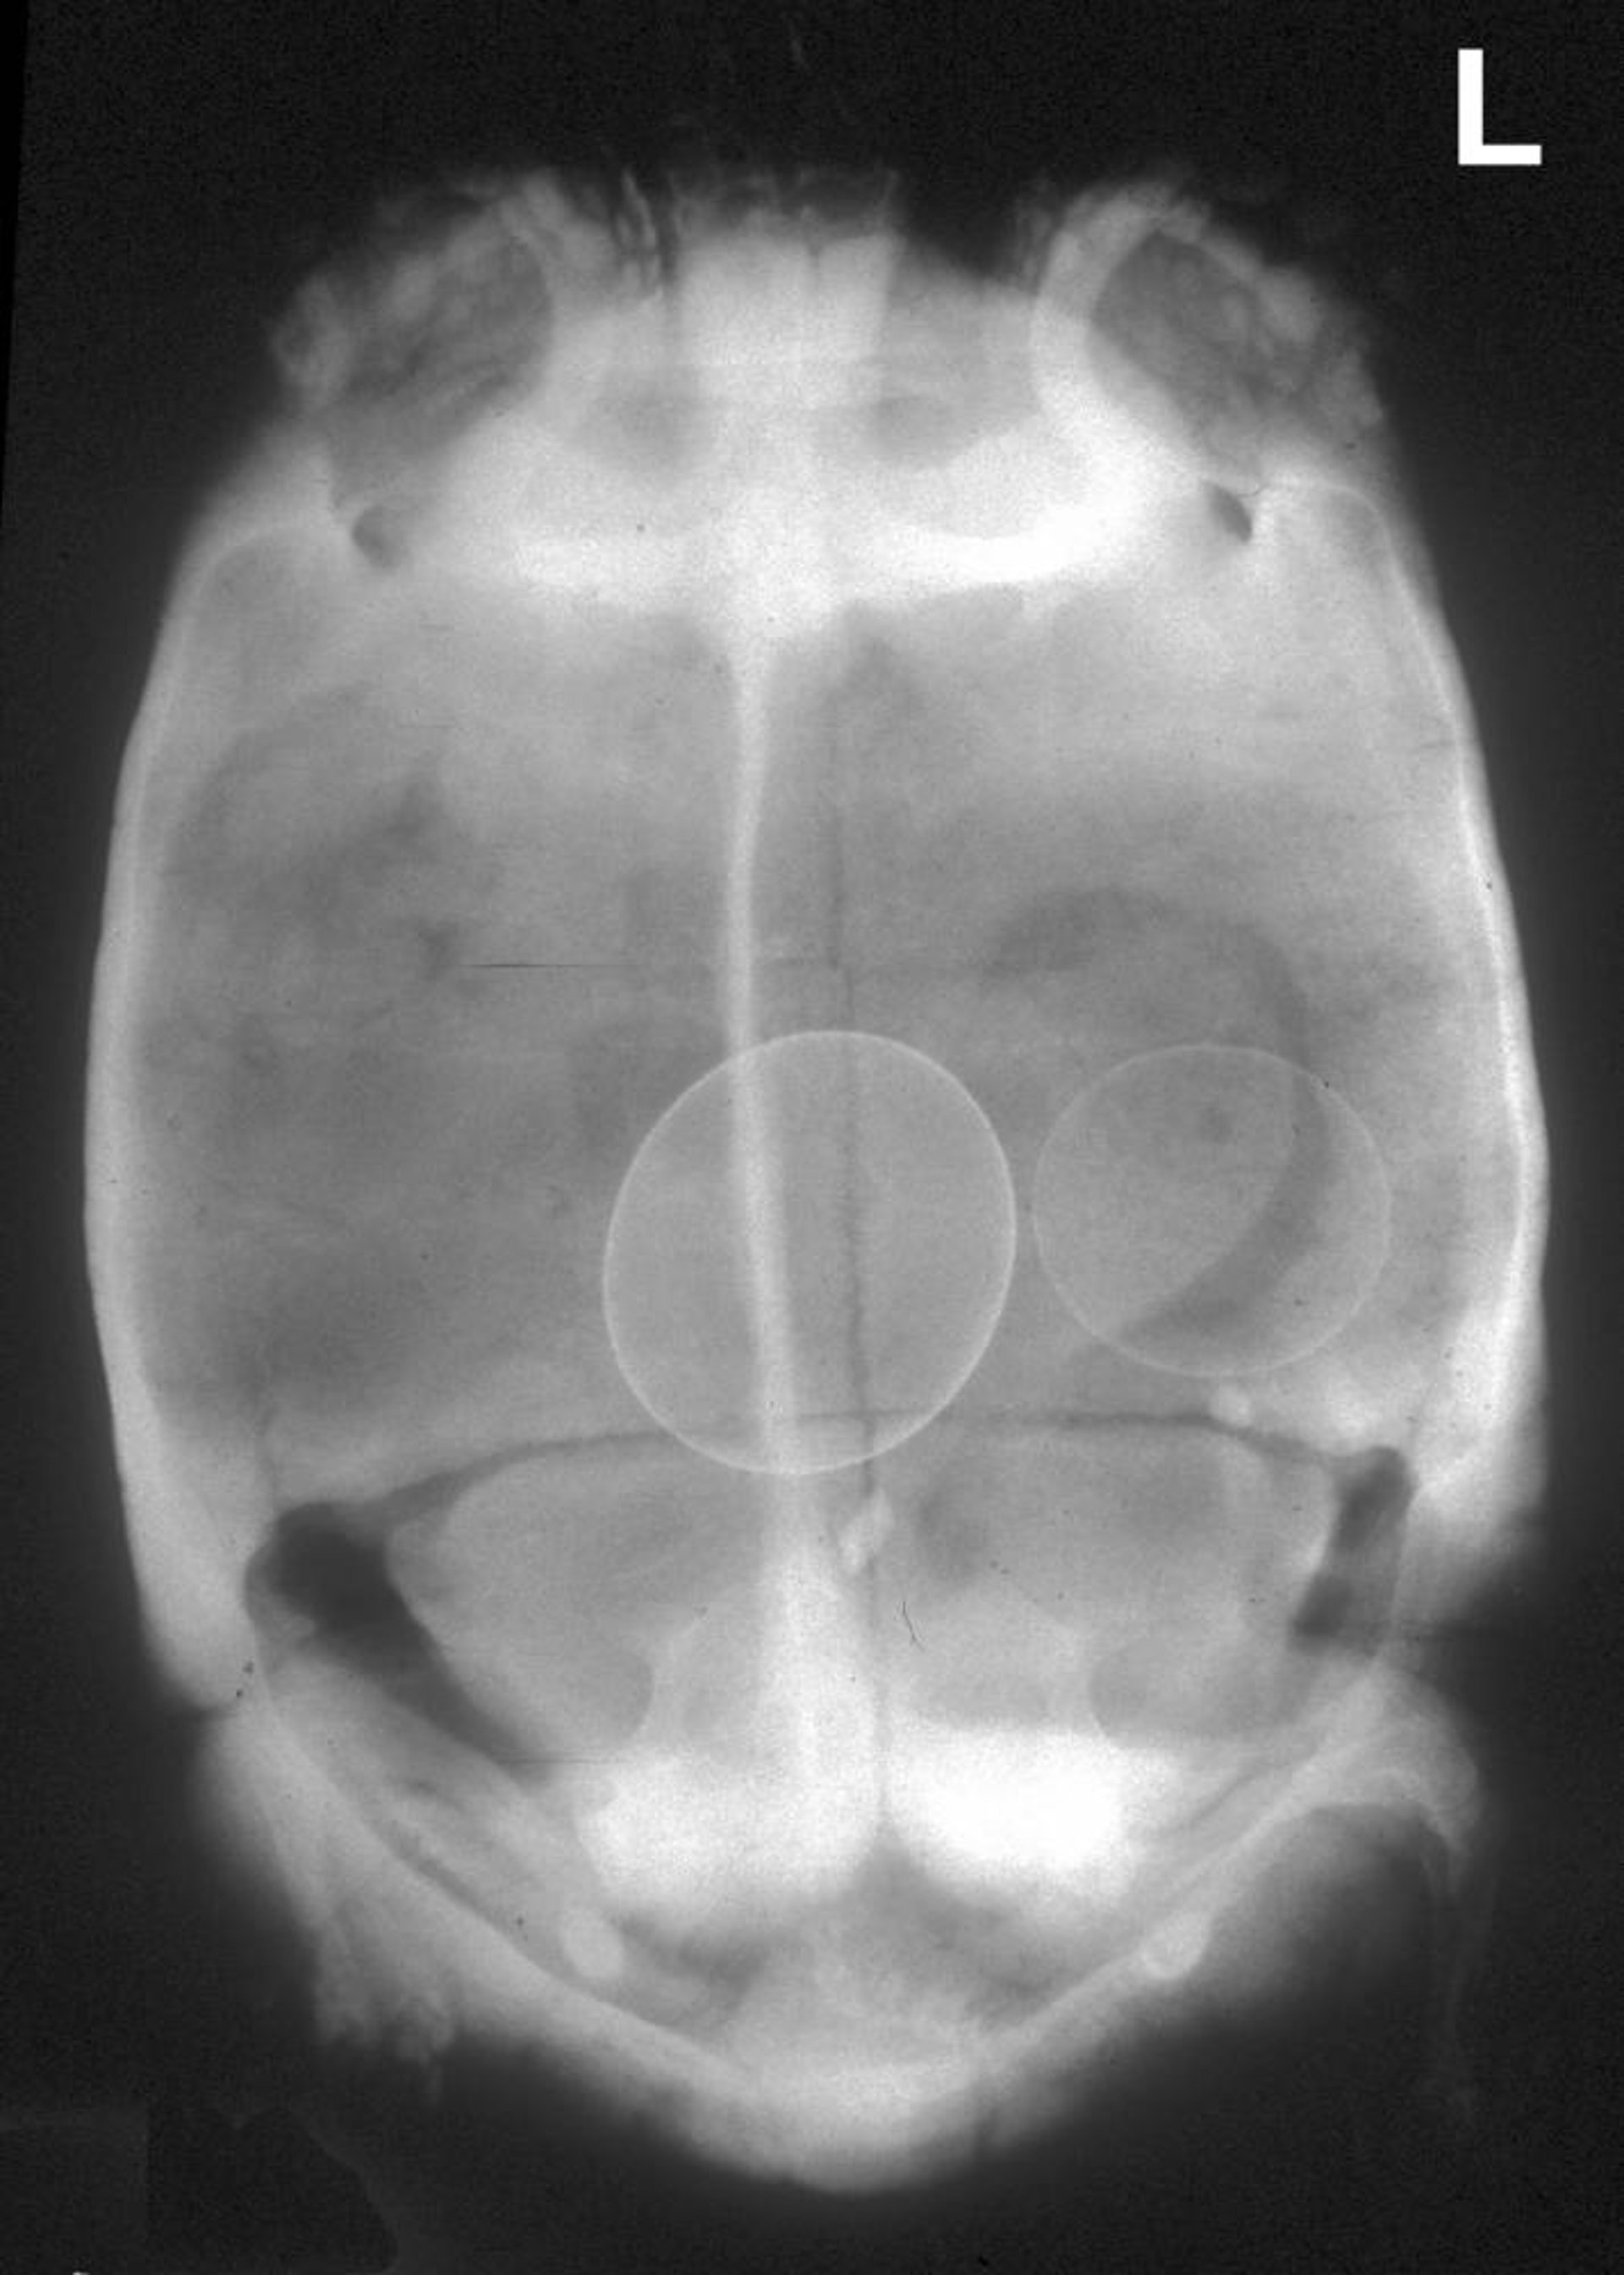 Tortoise with retained eggs, radiograph